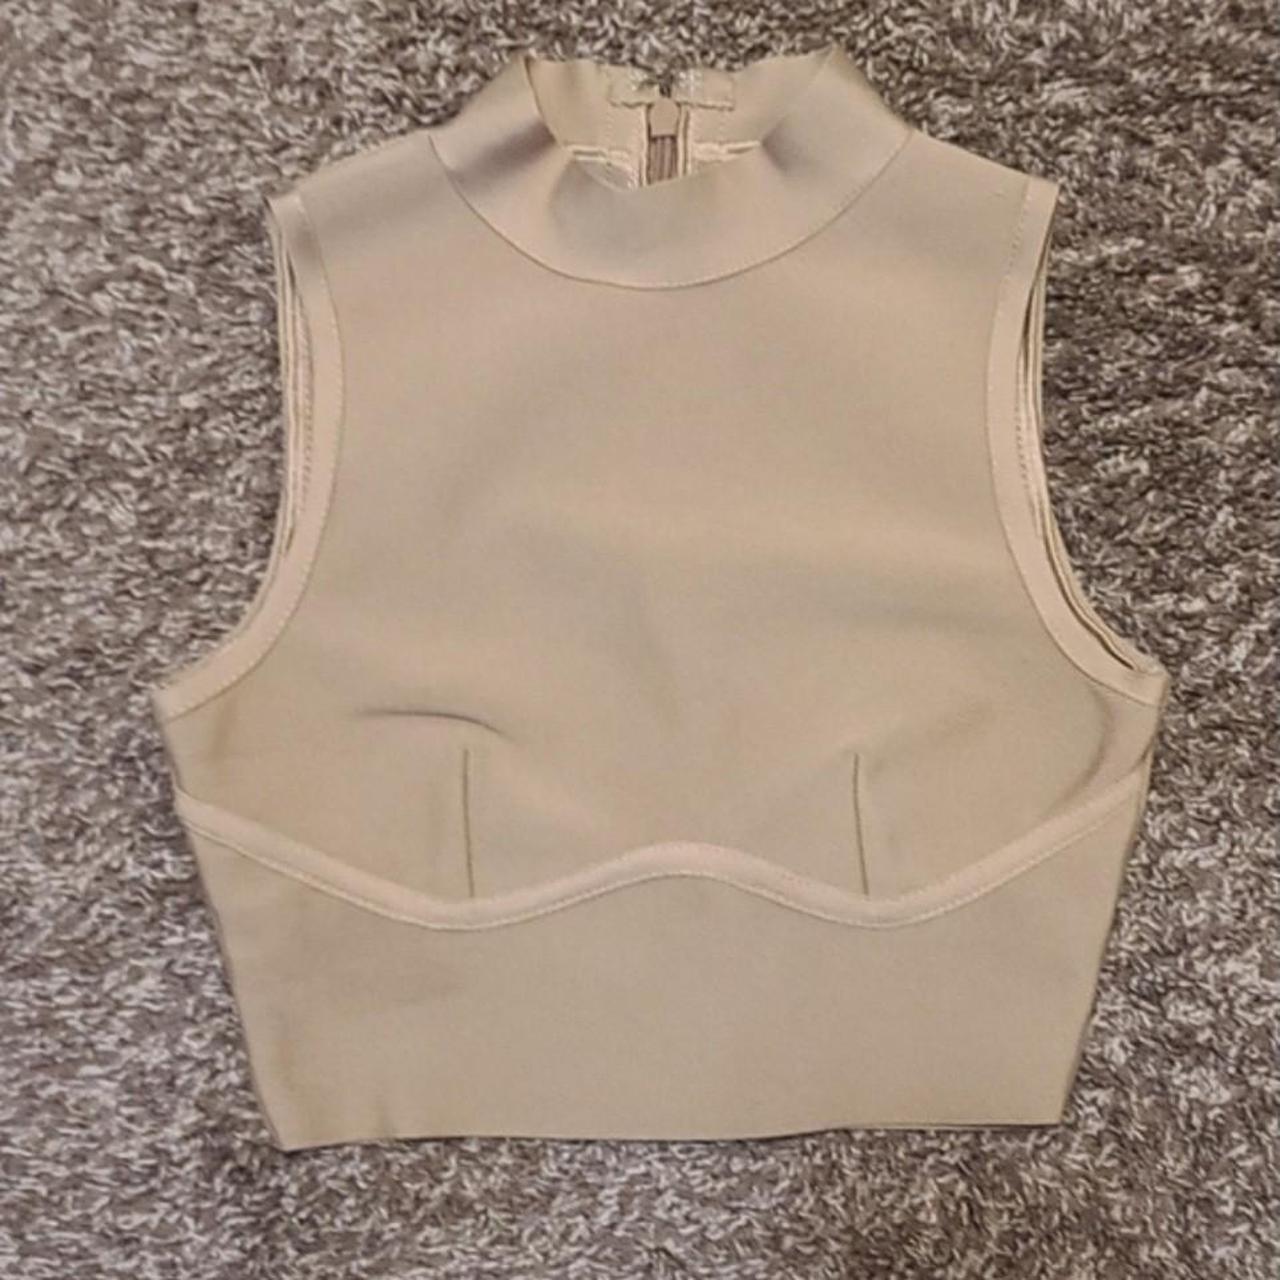 Product Image 1 - High neck crop top
Worn once
Size